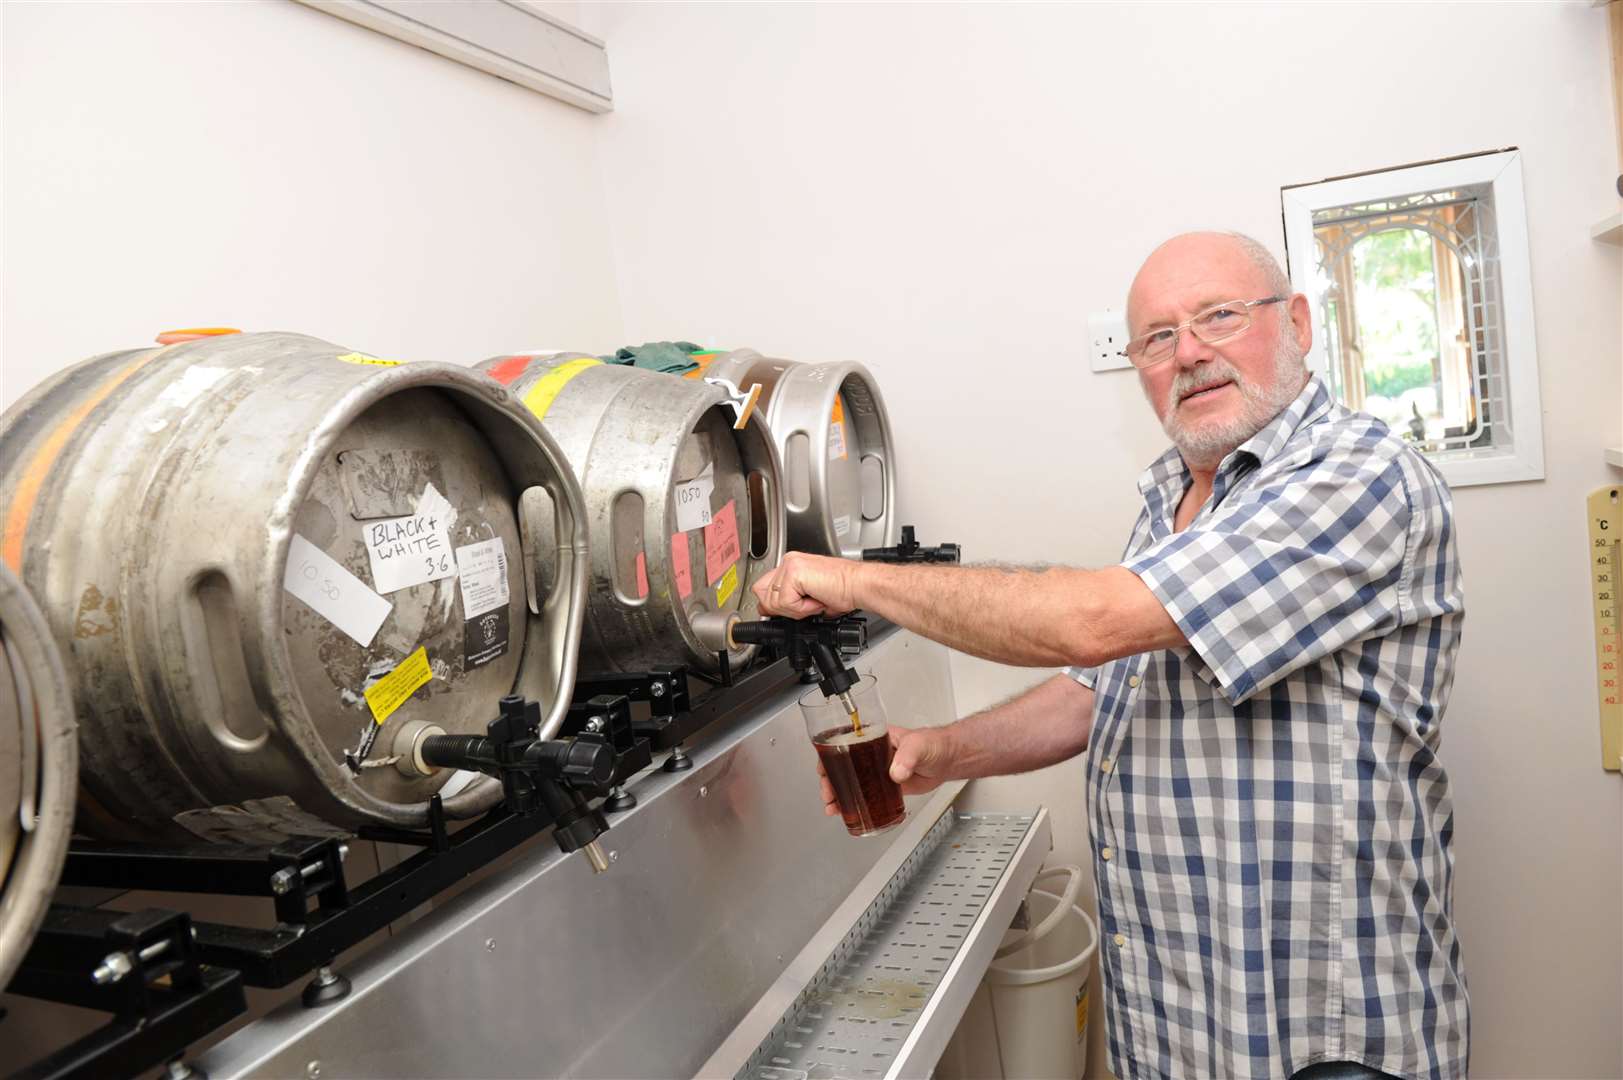 The 10:50 from Victoria owner Bob Jackson pouring a pint after the pub opened in 2015